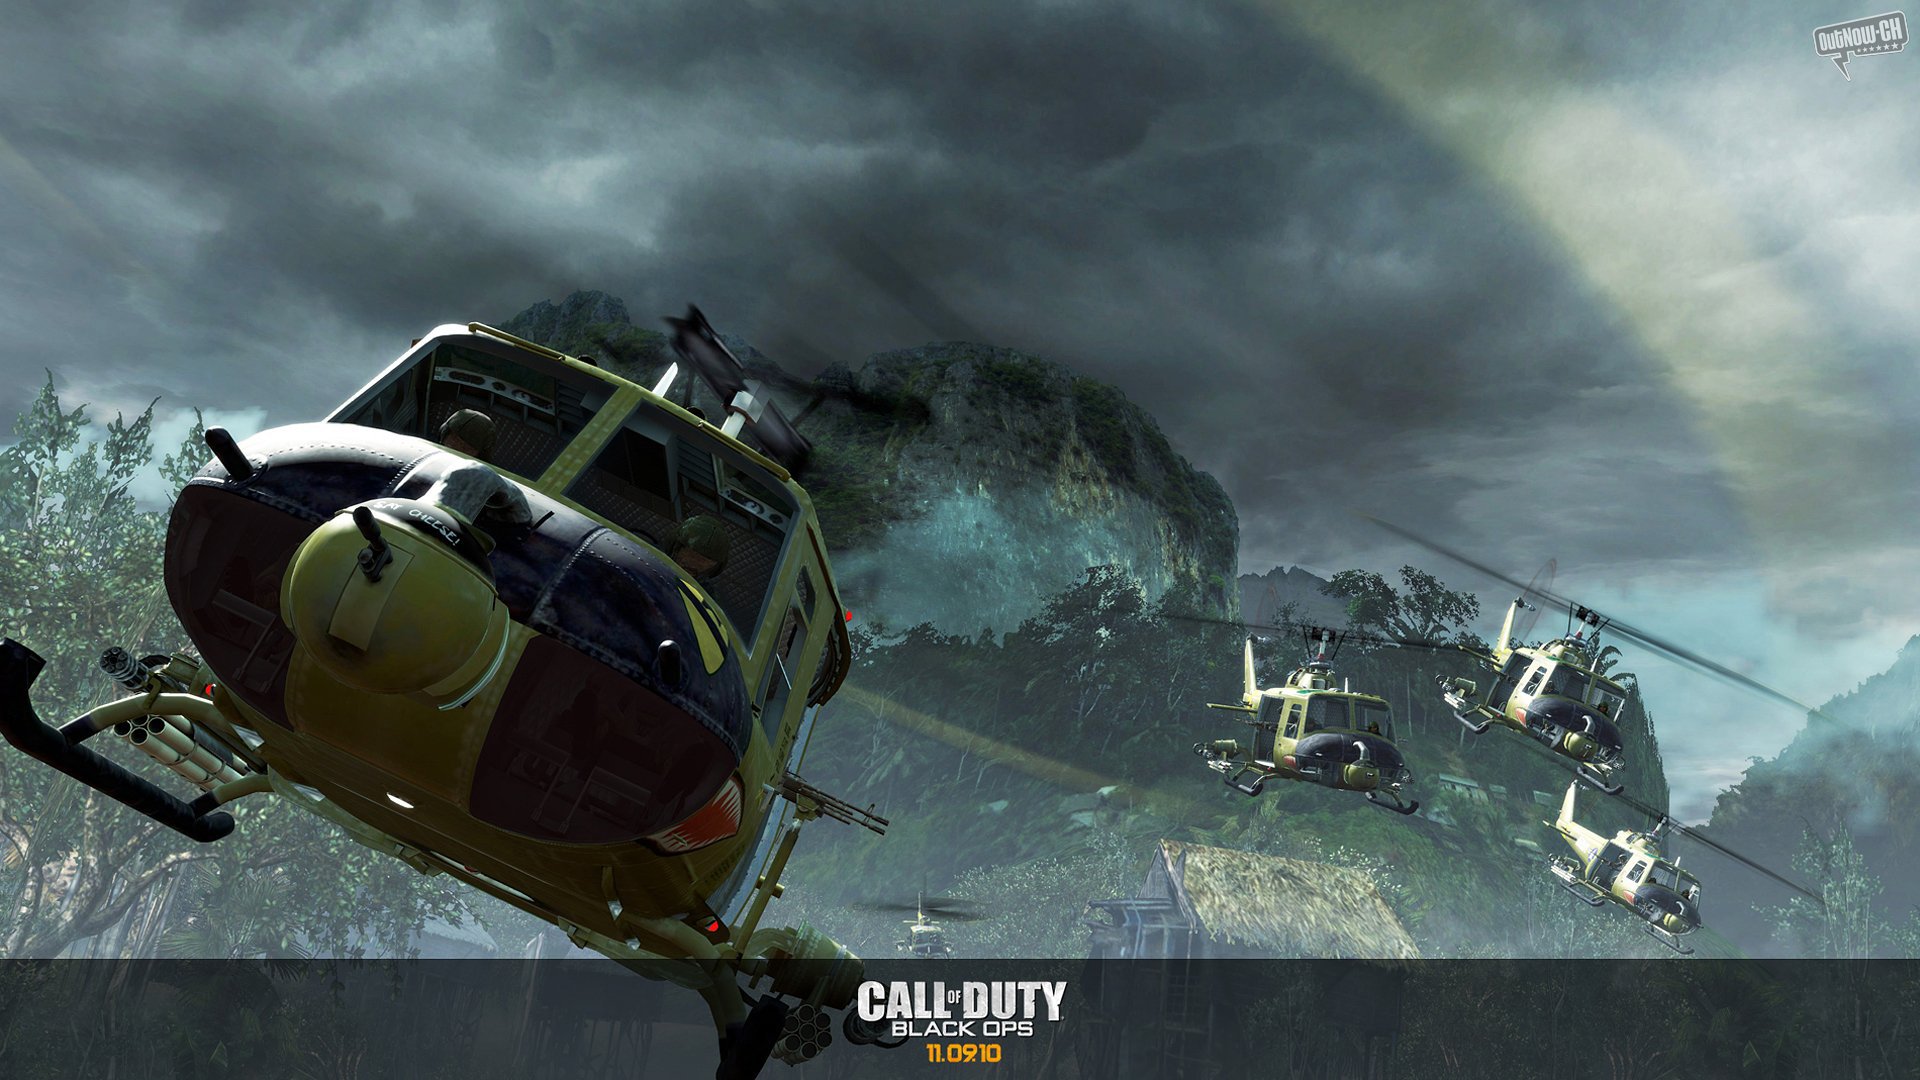 Call Of Duty Black Ops Helicopters Full HD Desktop Wallpaper 1080p